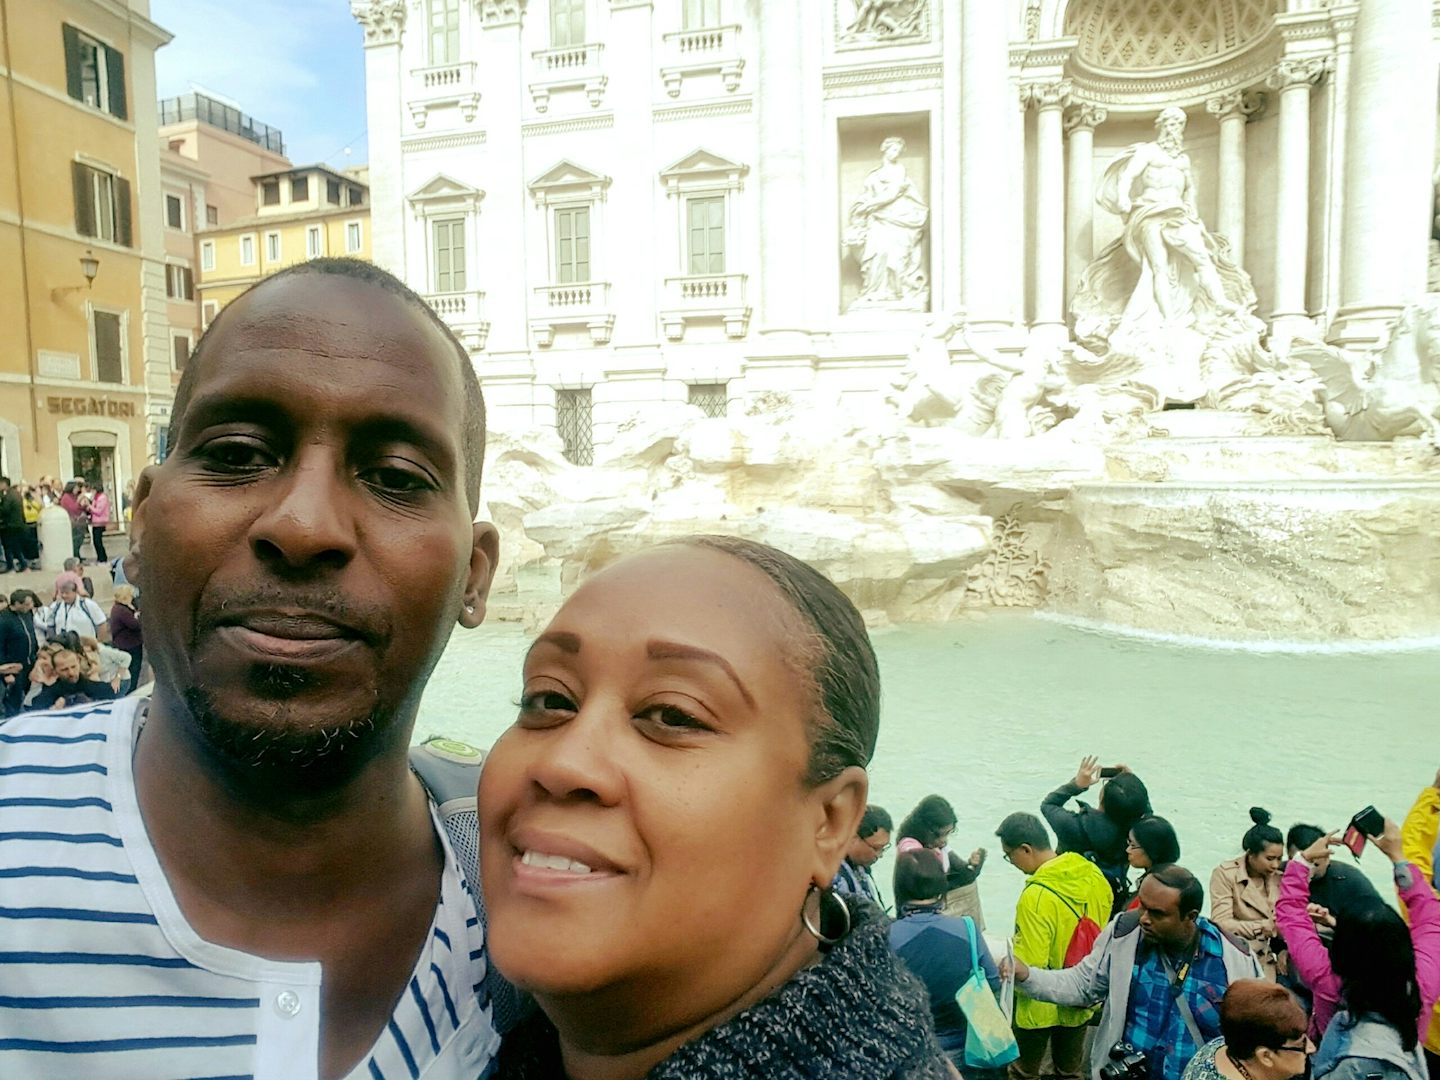 Hubby & I in front of the Trevi Fountain in Rome Italy on our tour.